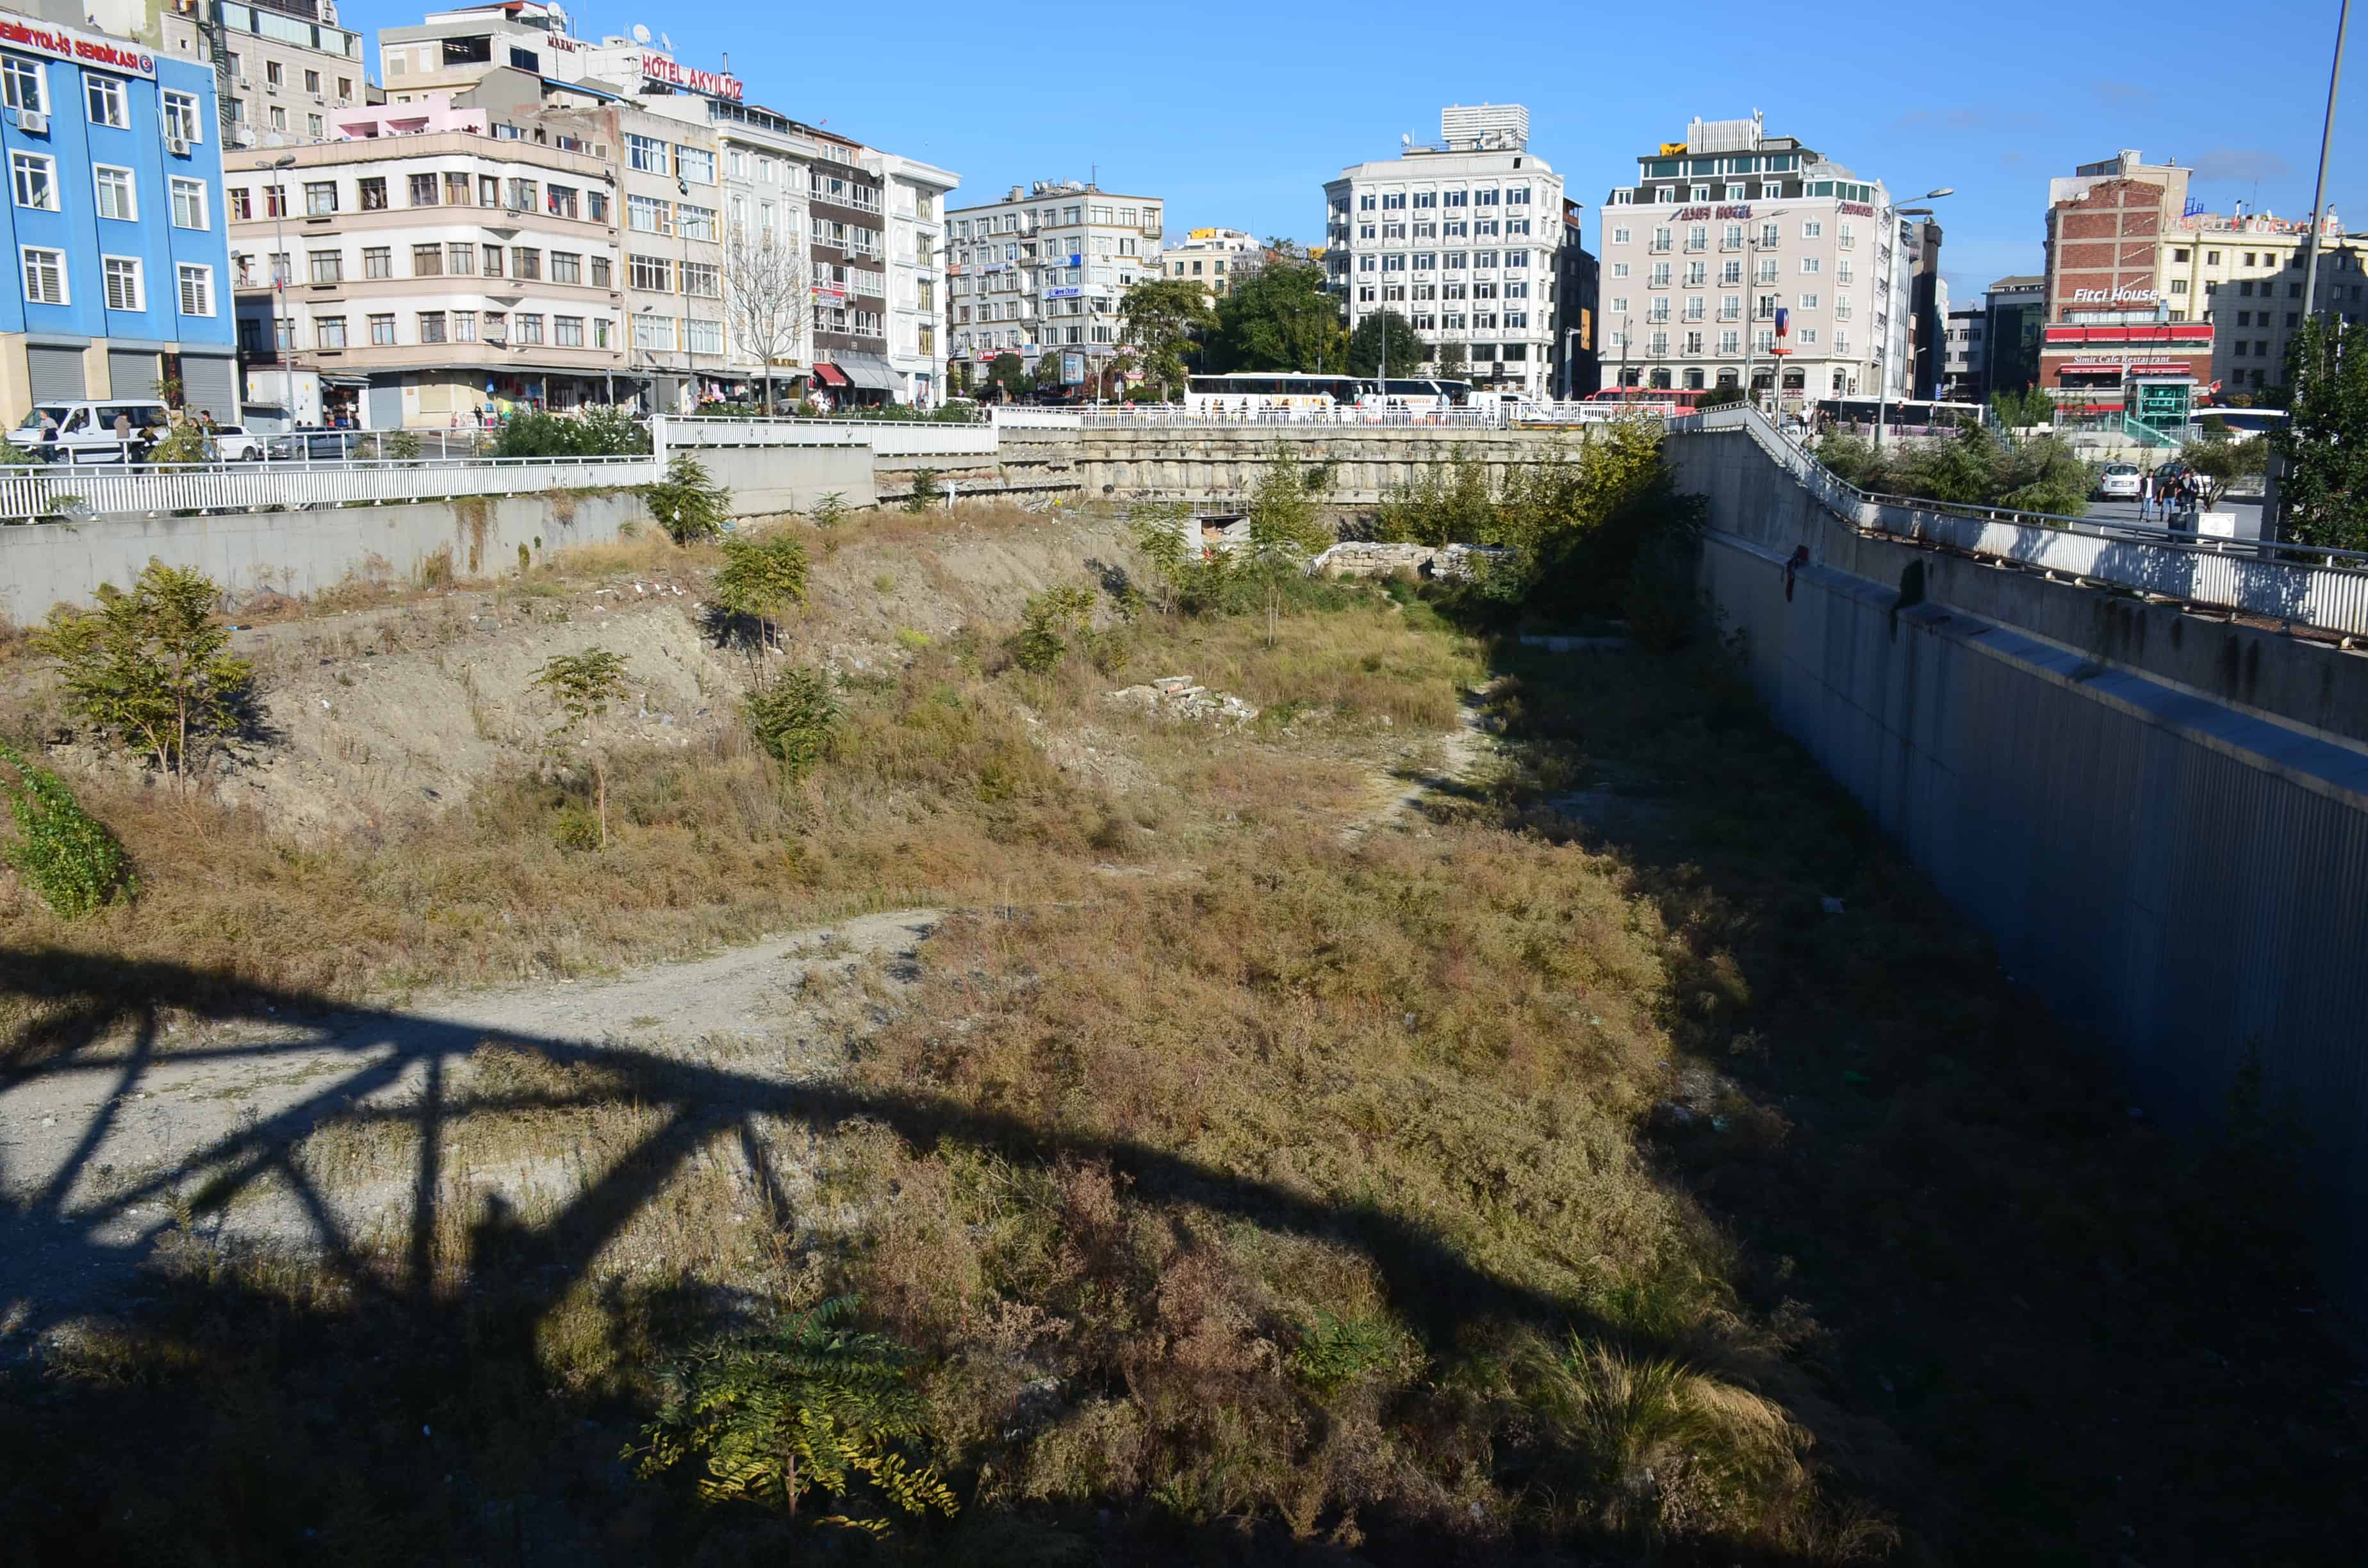 Harbor of Eleutherios after the dig in November 2019, Yenikapı, Istanbul, Turkey